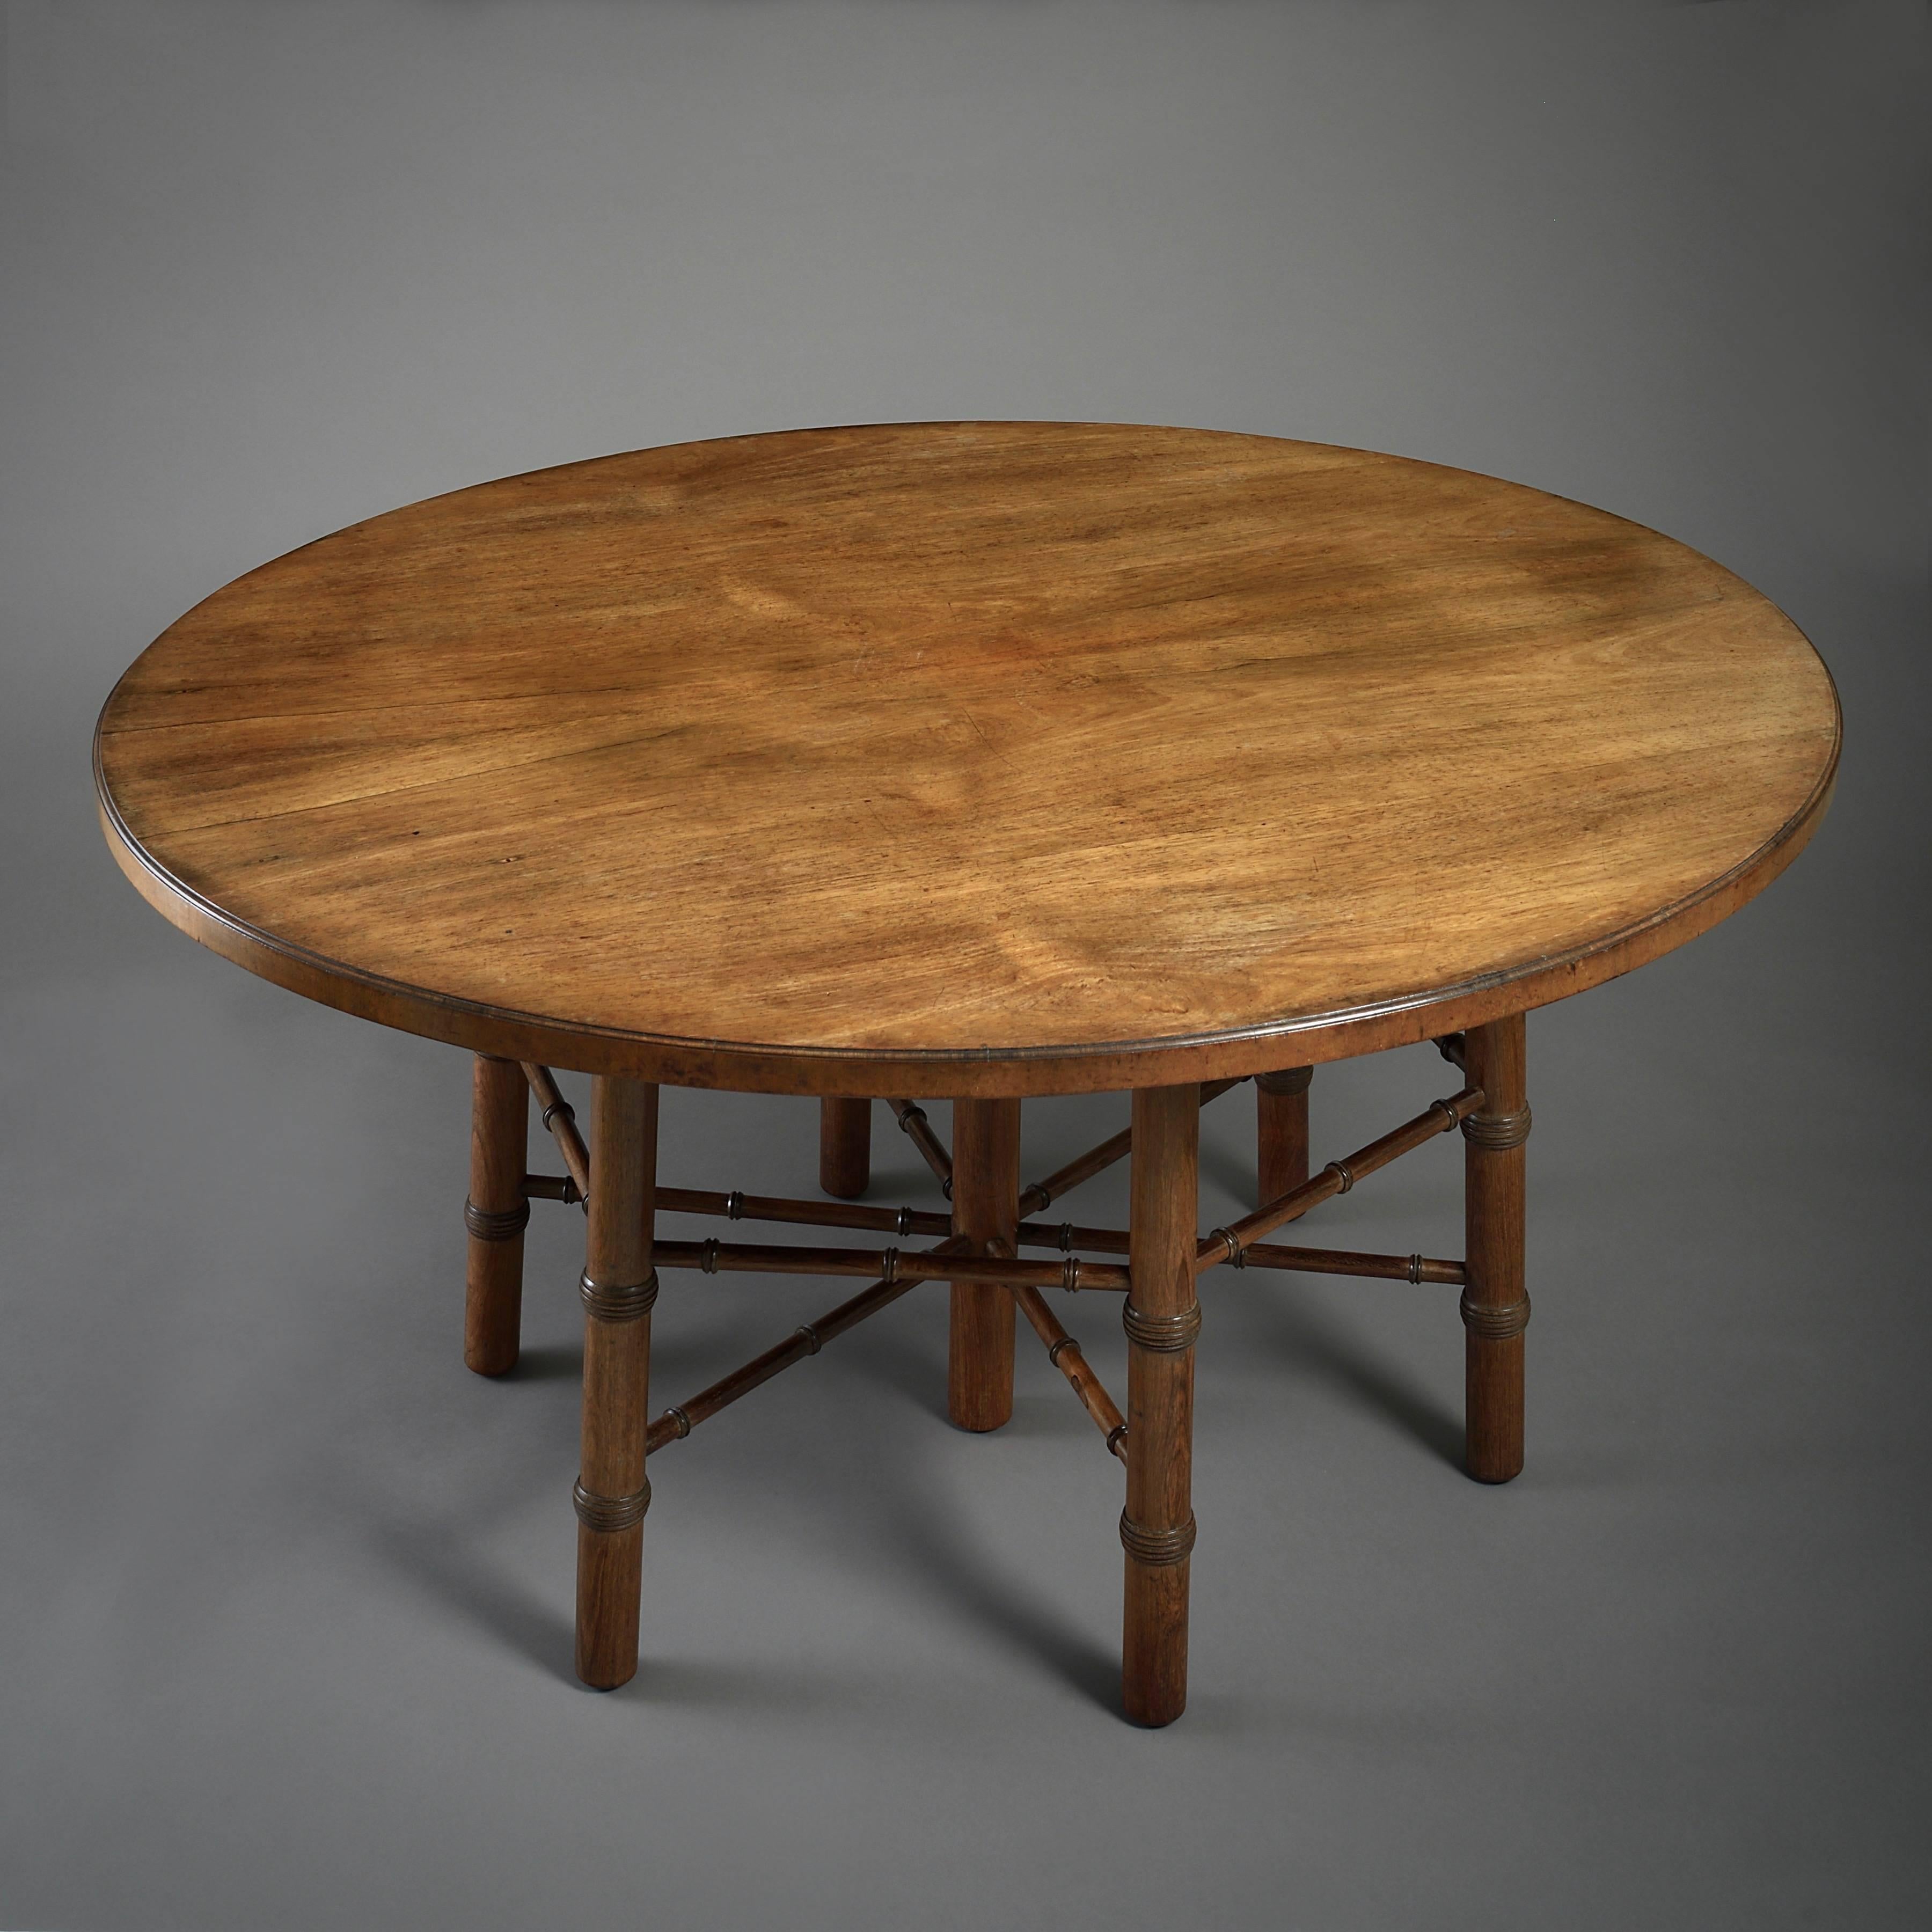 An important rosewood centre table, designed by Philip Webb and manufactured by Morris & Co., circa 1870-1880.